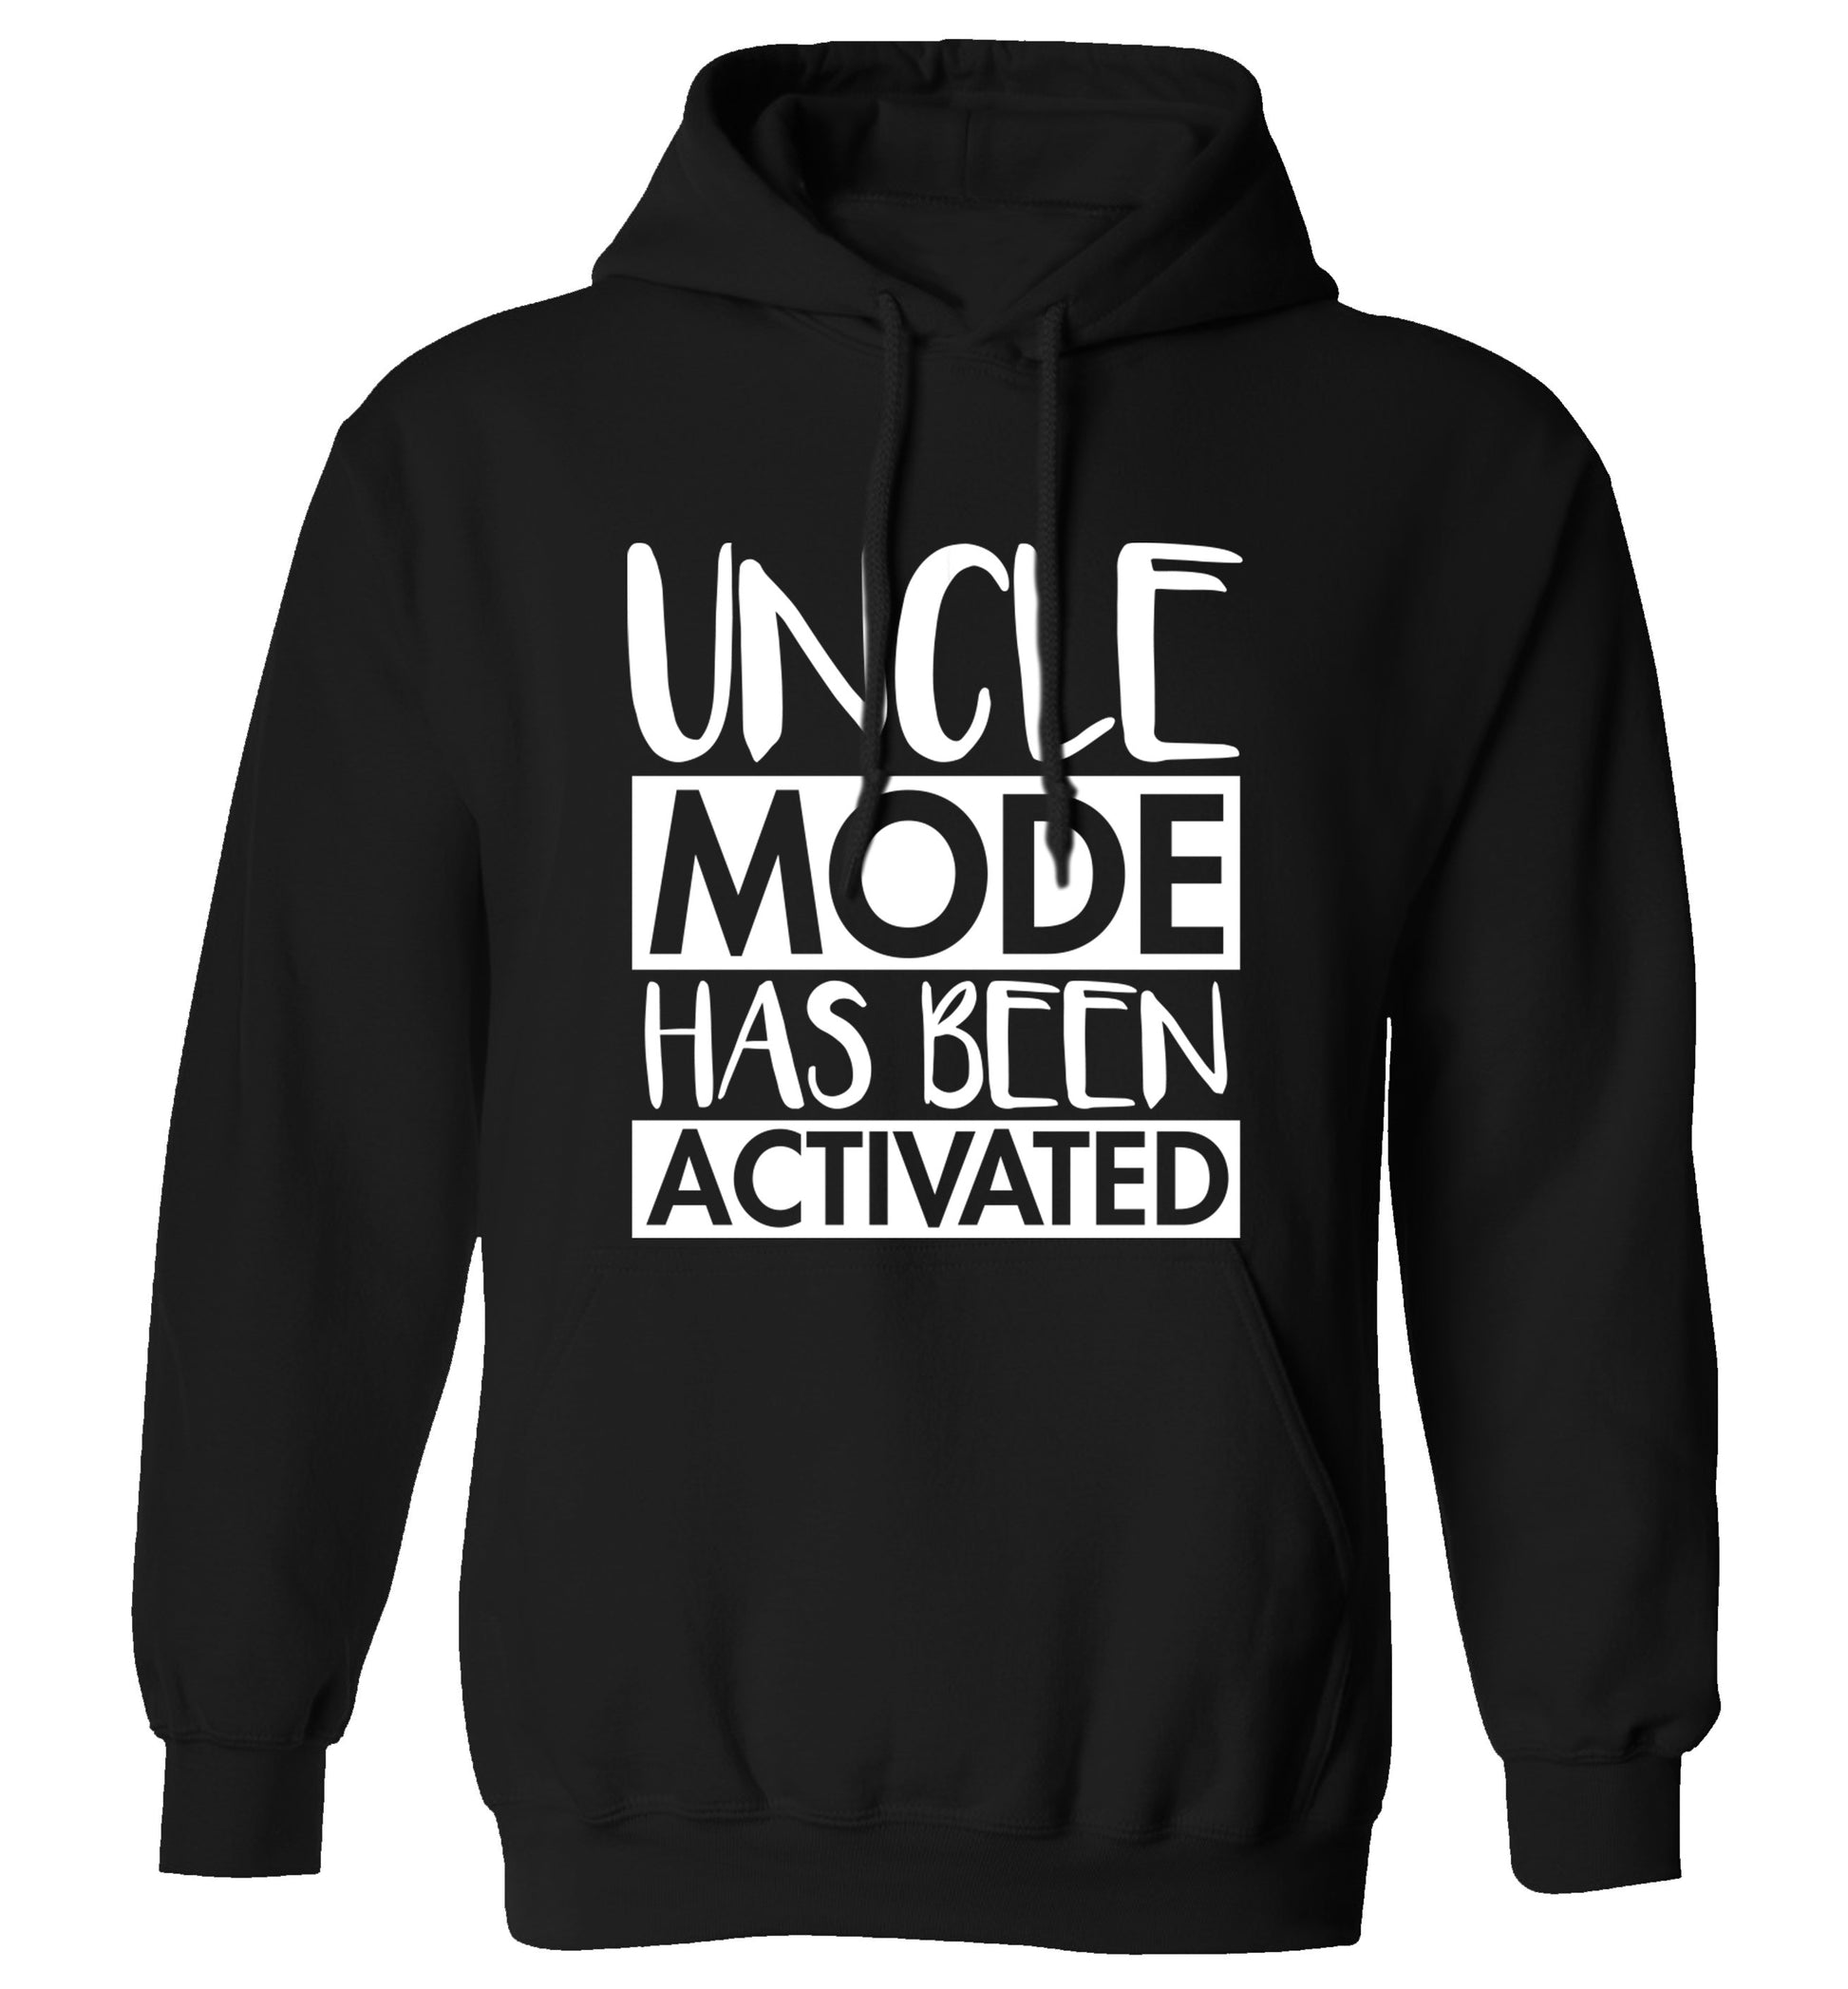 Uncle mode activated adults unisex black hoodie 2XL